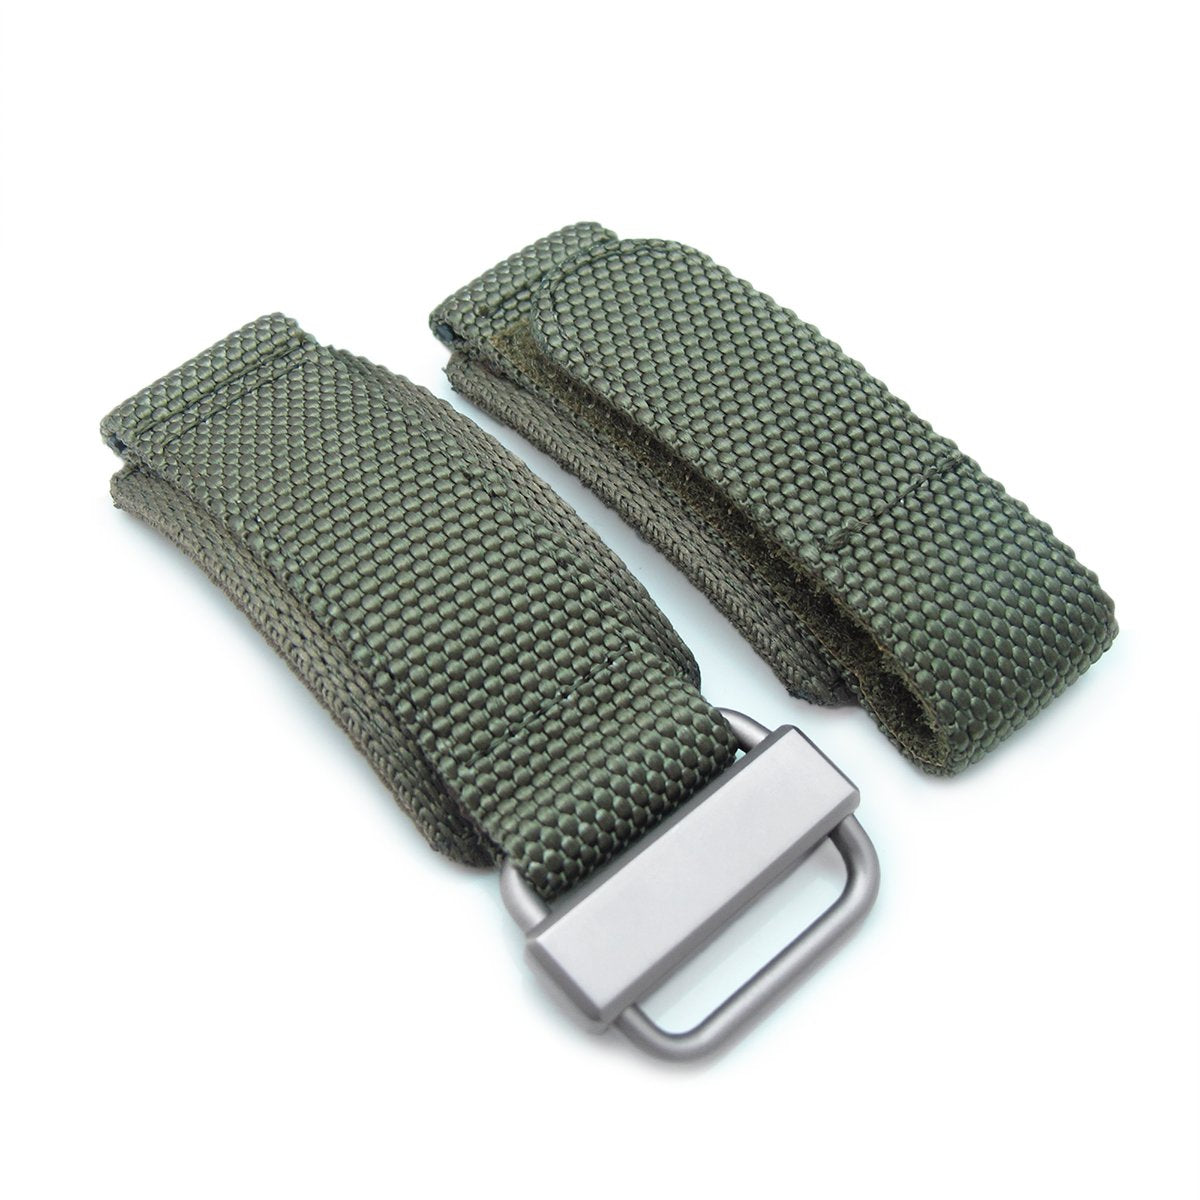 22mm MiLTAT Honeycomb Military Green Nylon Velcro Fastener Watch Strap Brushed Stainless Buckle XL Strapcode Watch Bands